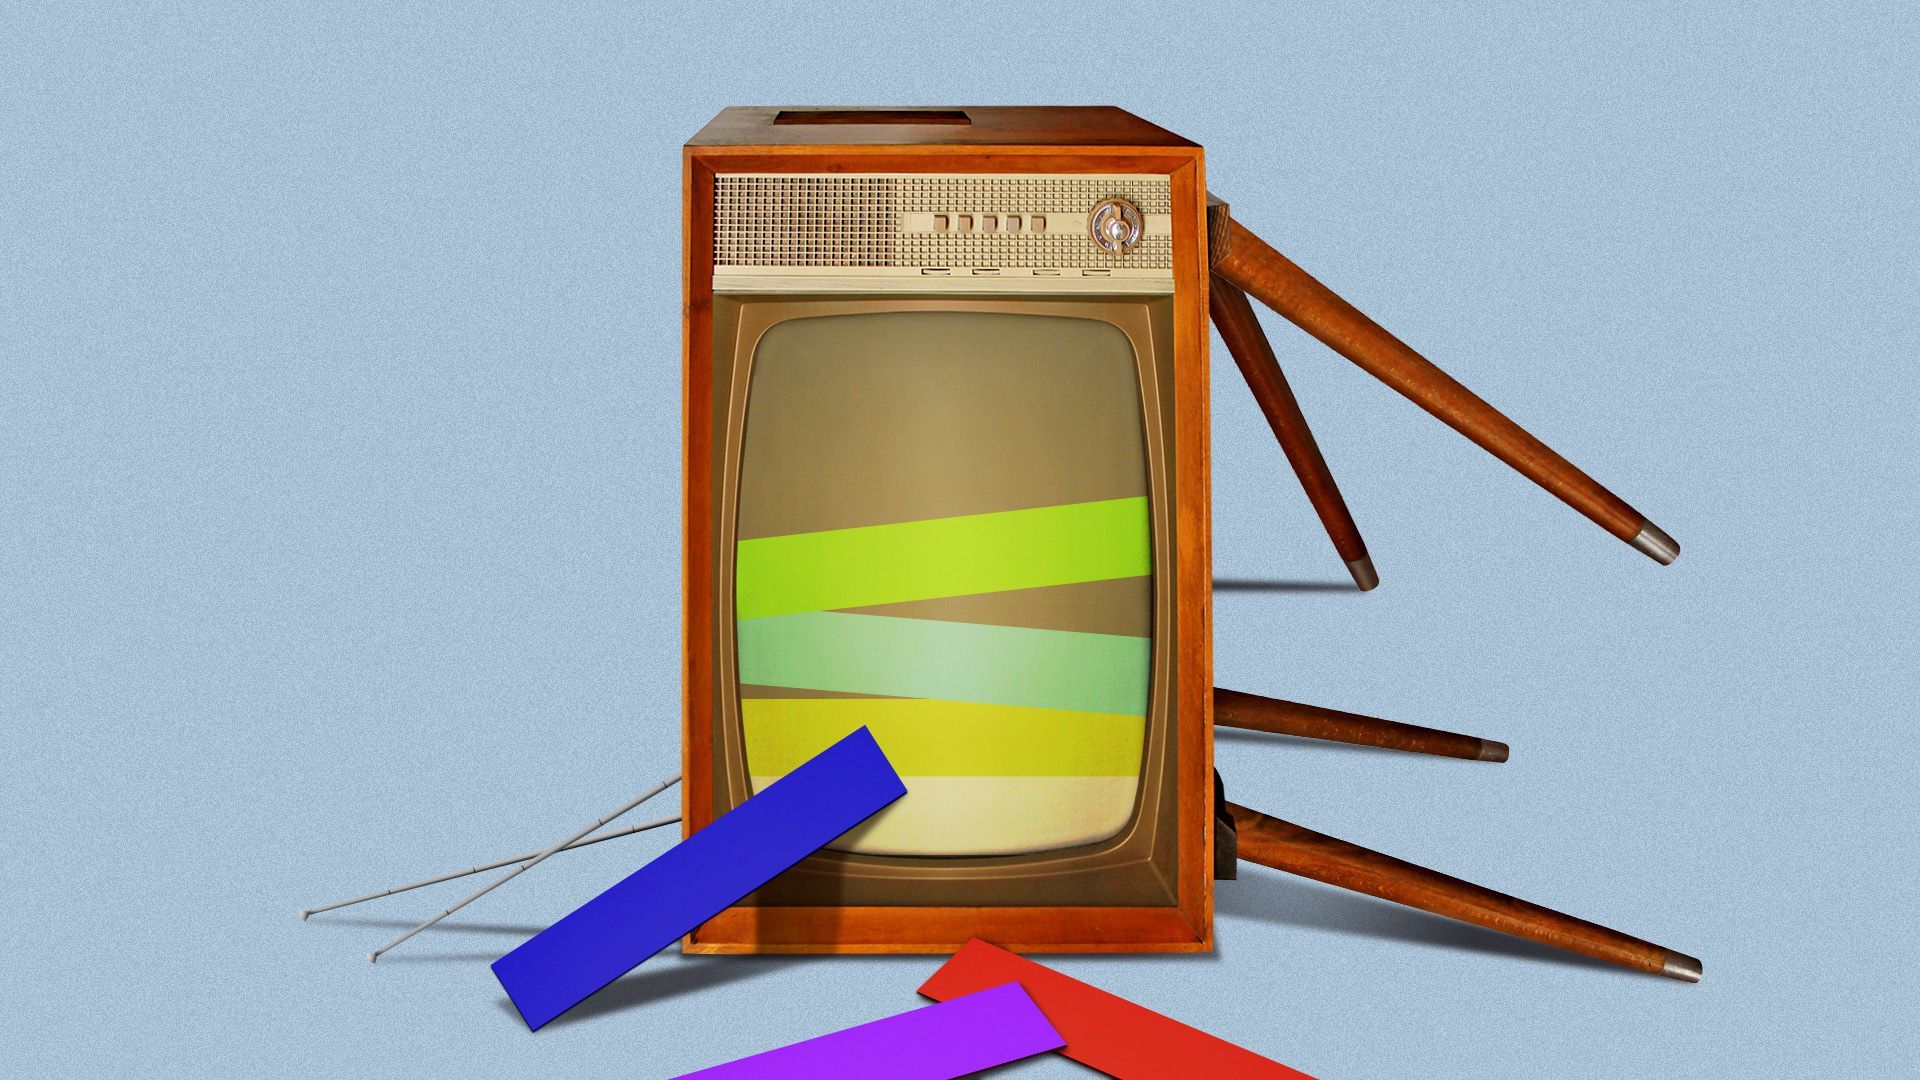 Illustration of a toppled over vintage television with color bars falling out onto the floor